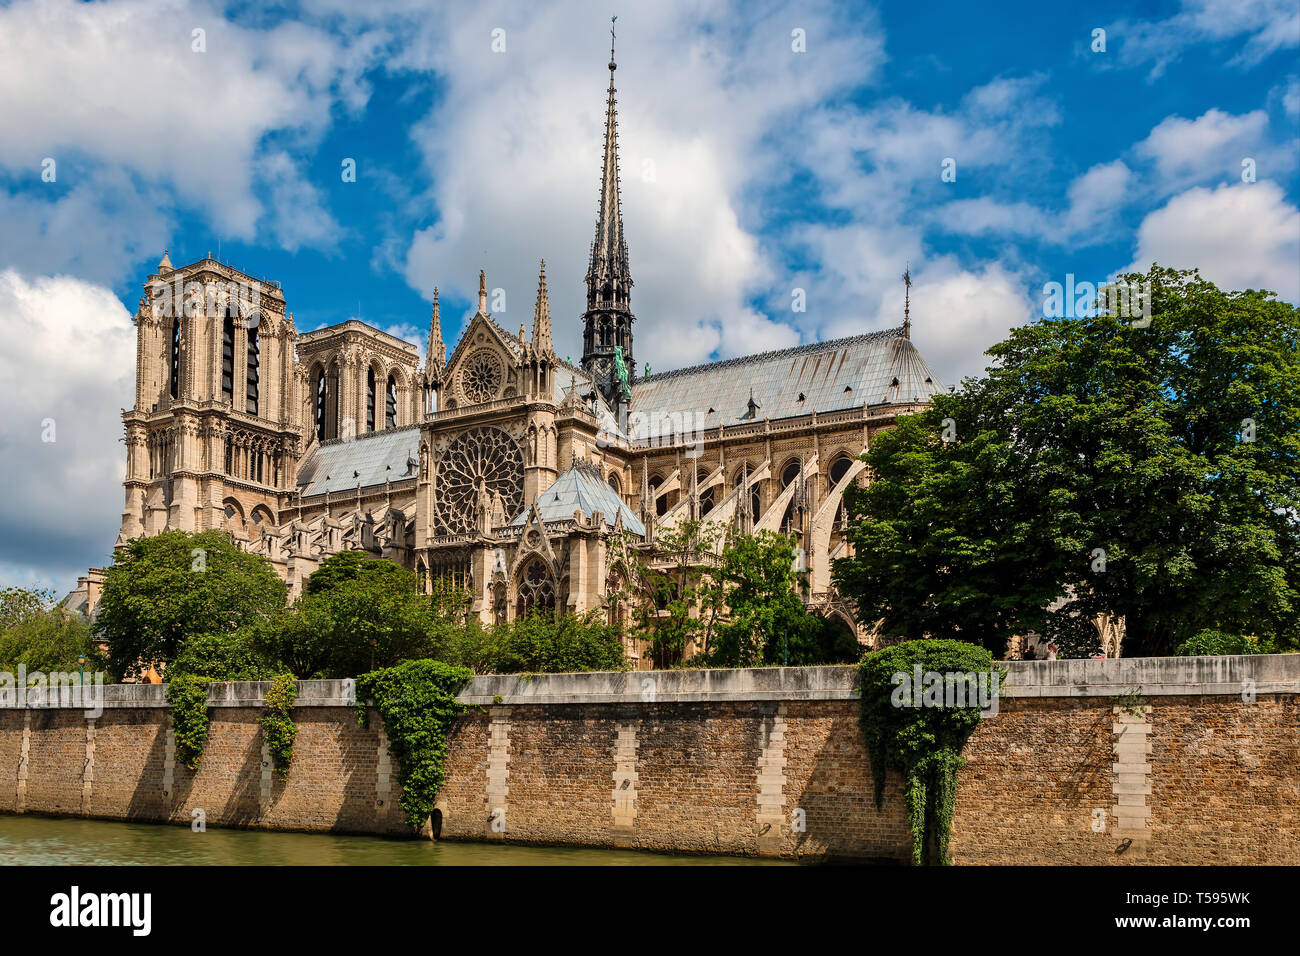 View of famous Notre-Dame cathedral under beautiful sky in Paris, France. Stock Photo